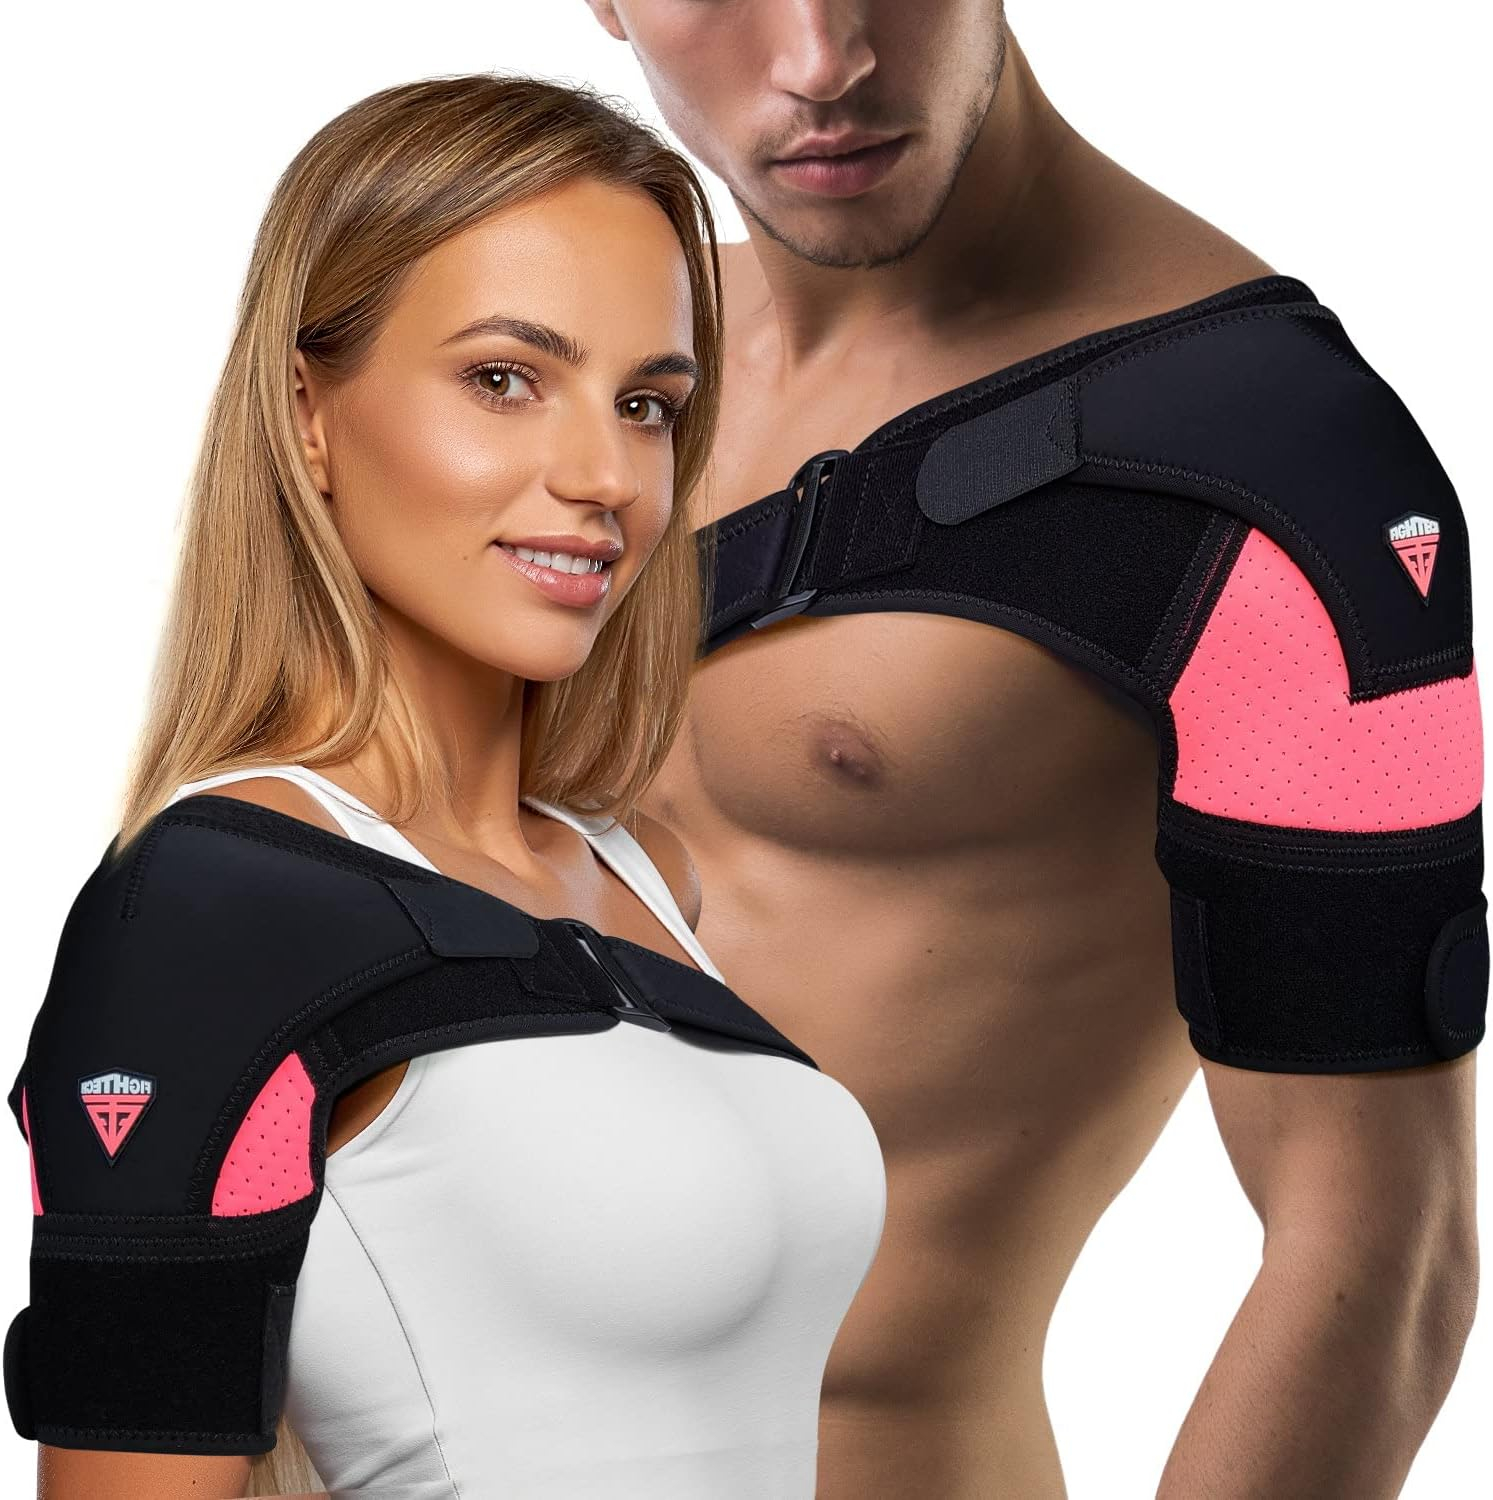 Shoulder Brace for Torn Rotator Cuff - 4 Sizes - Shoulder Pain Relief, Support and Compression - Sleeve Wrap for Shoulder Stability and Recovery - Fits Left and Right Arm, Men  Women (Pink, Large/X-Large)